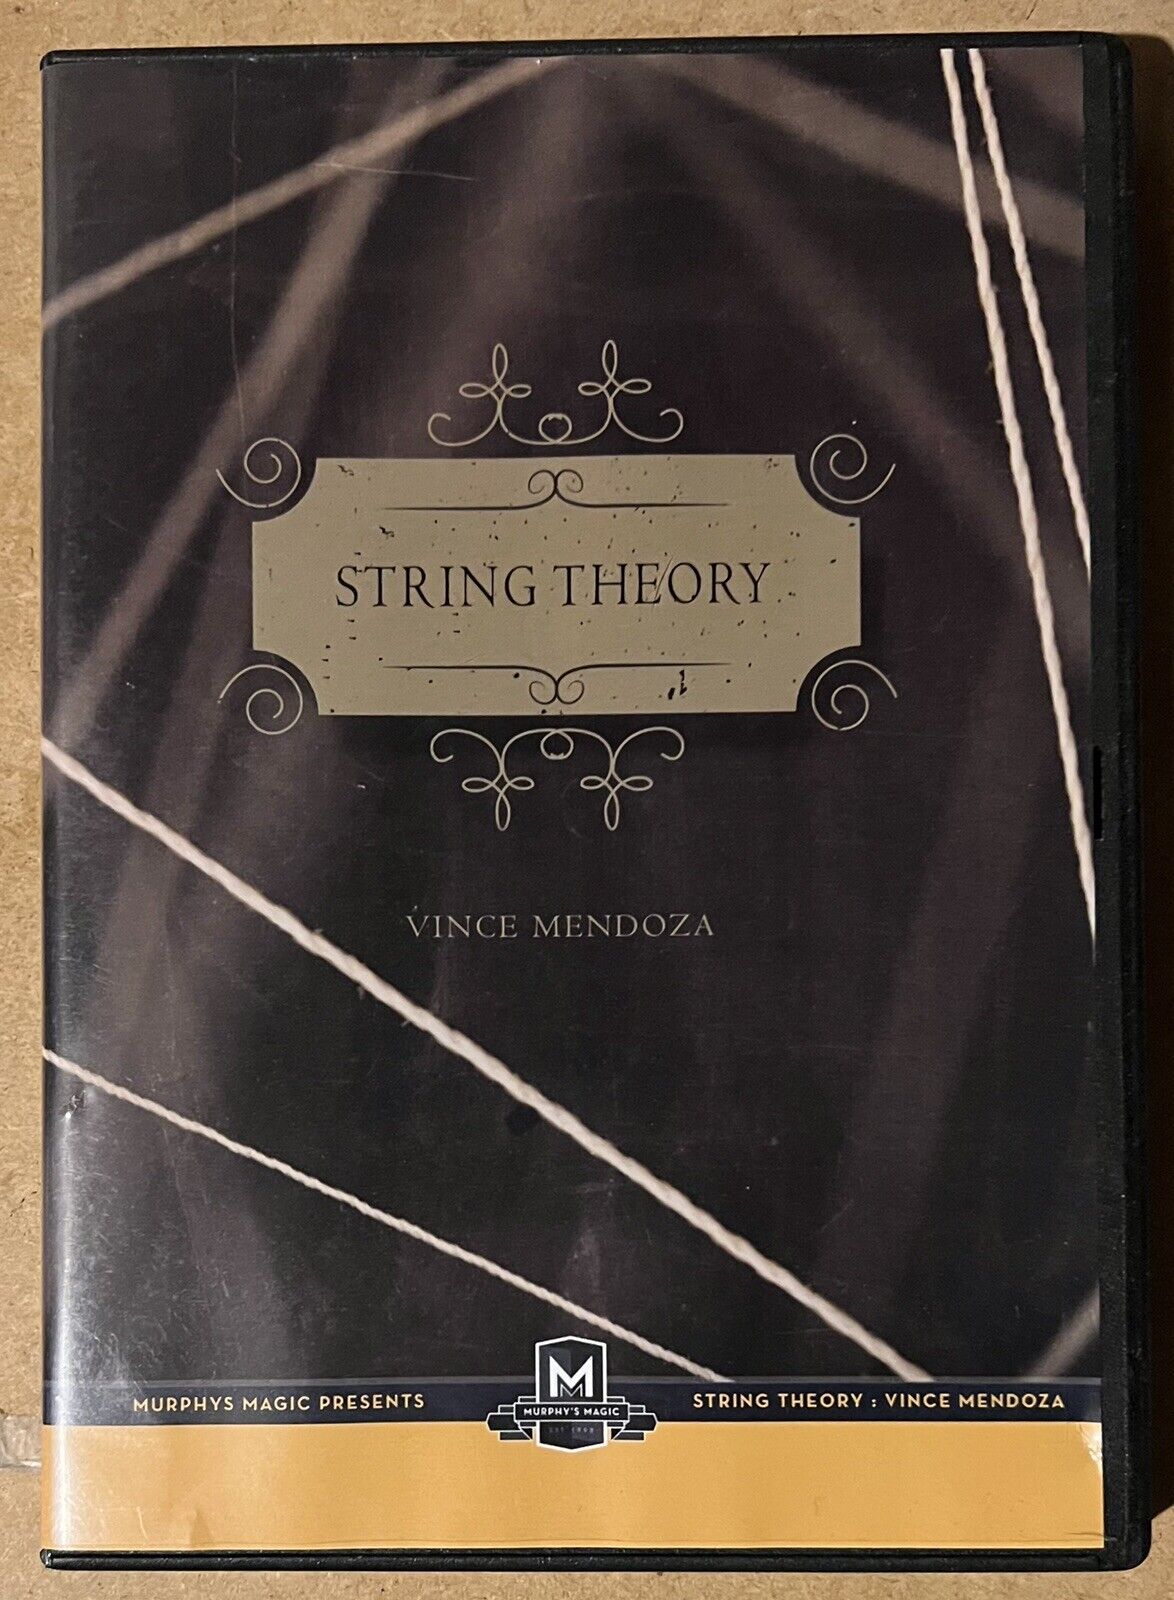 String Theory (DVD) by Vince Mendoza - DVD